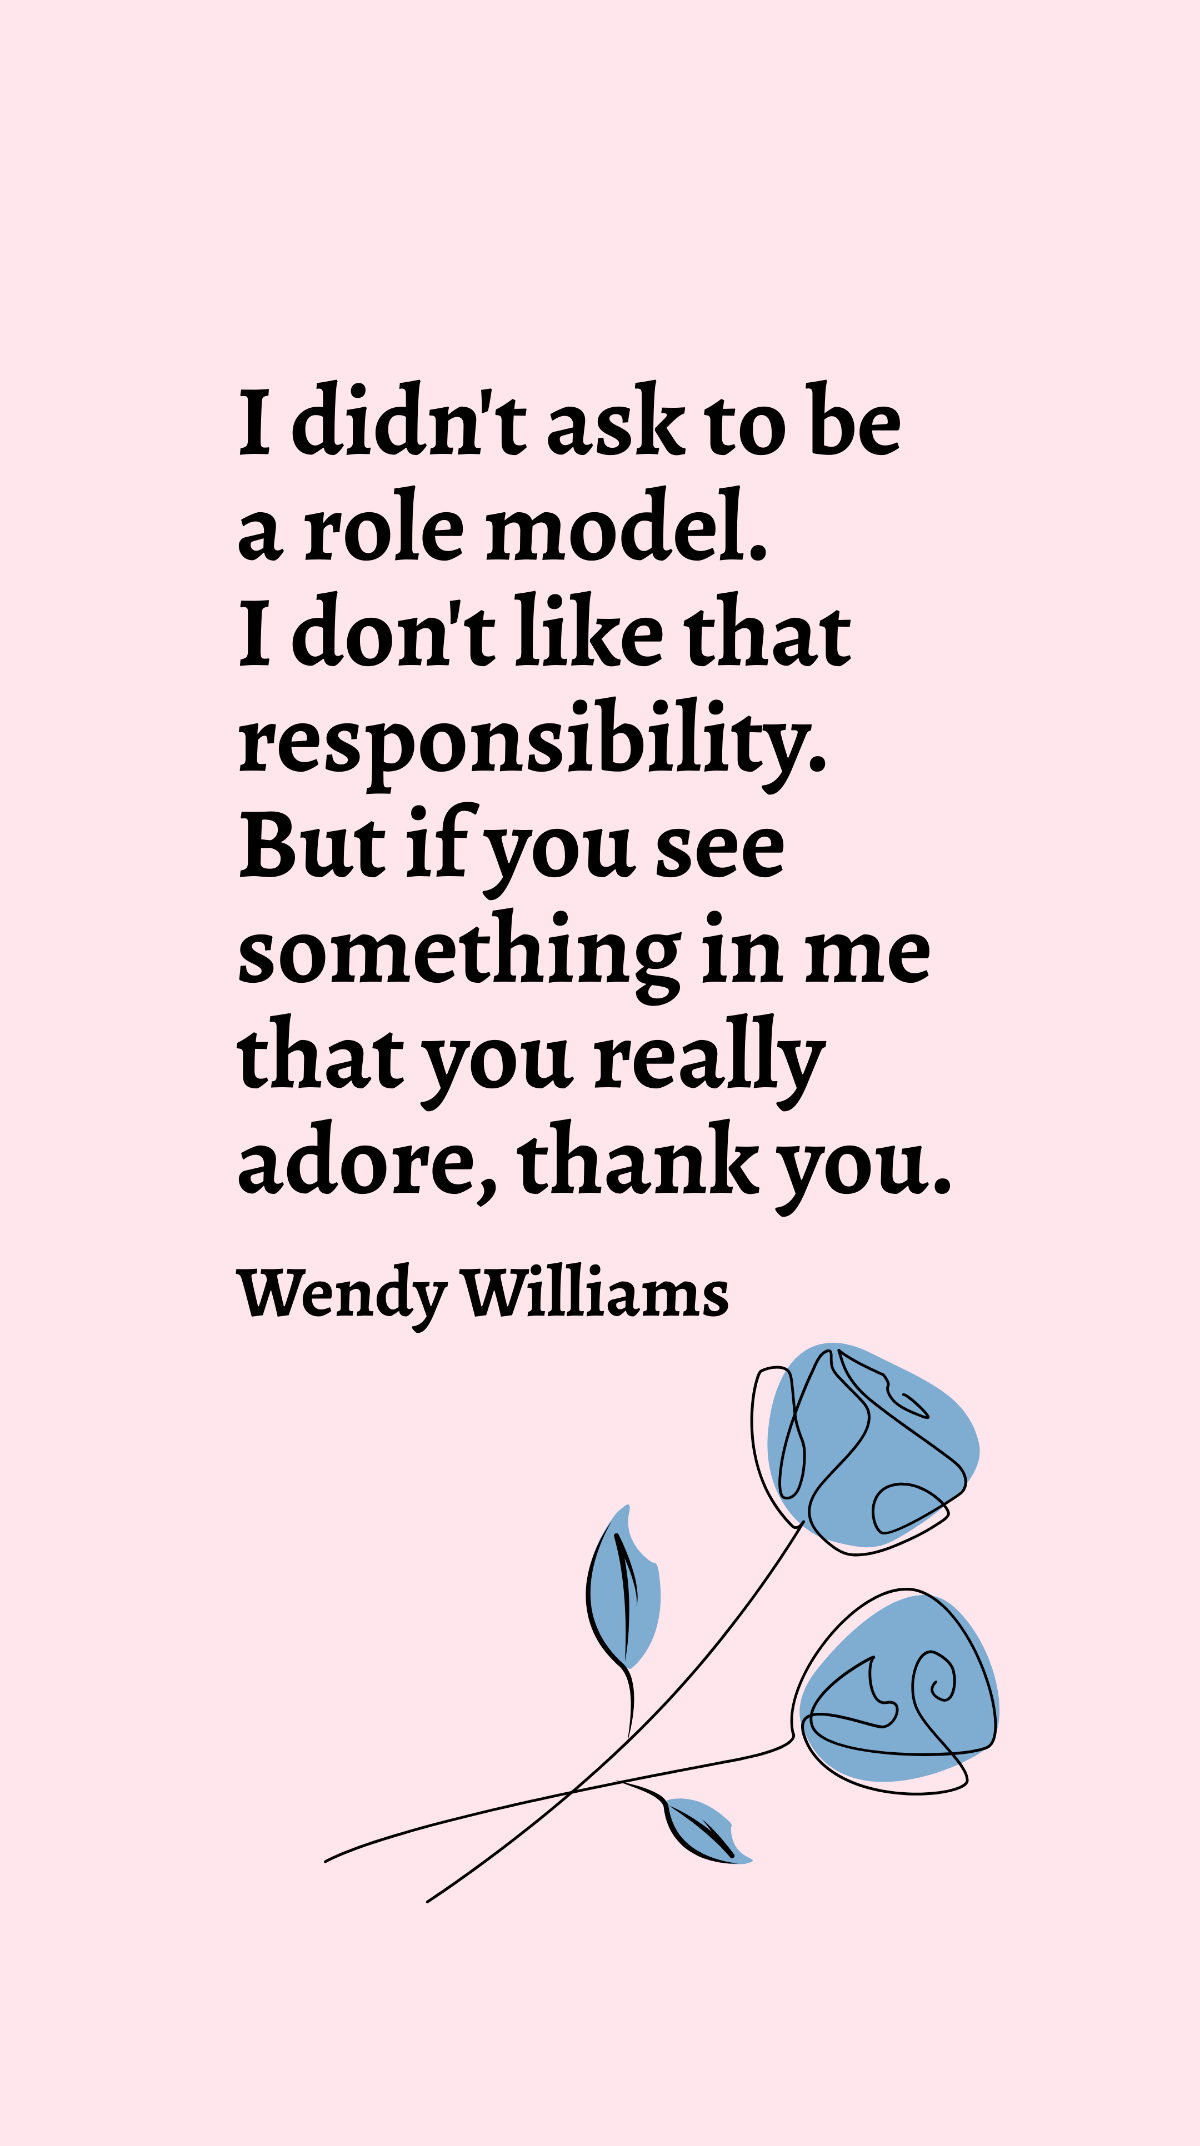 Wendy Williams - I didn't ask to be a role model. I don't like that responsibility. But if you see something in me that you really adore, thank you. Template